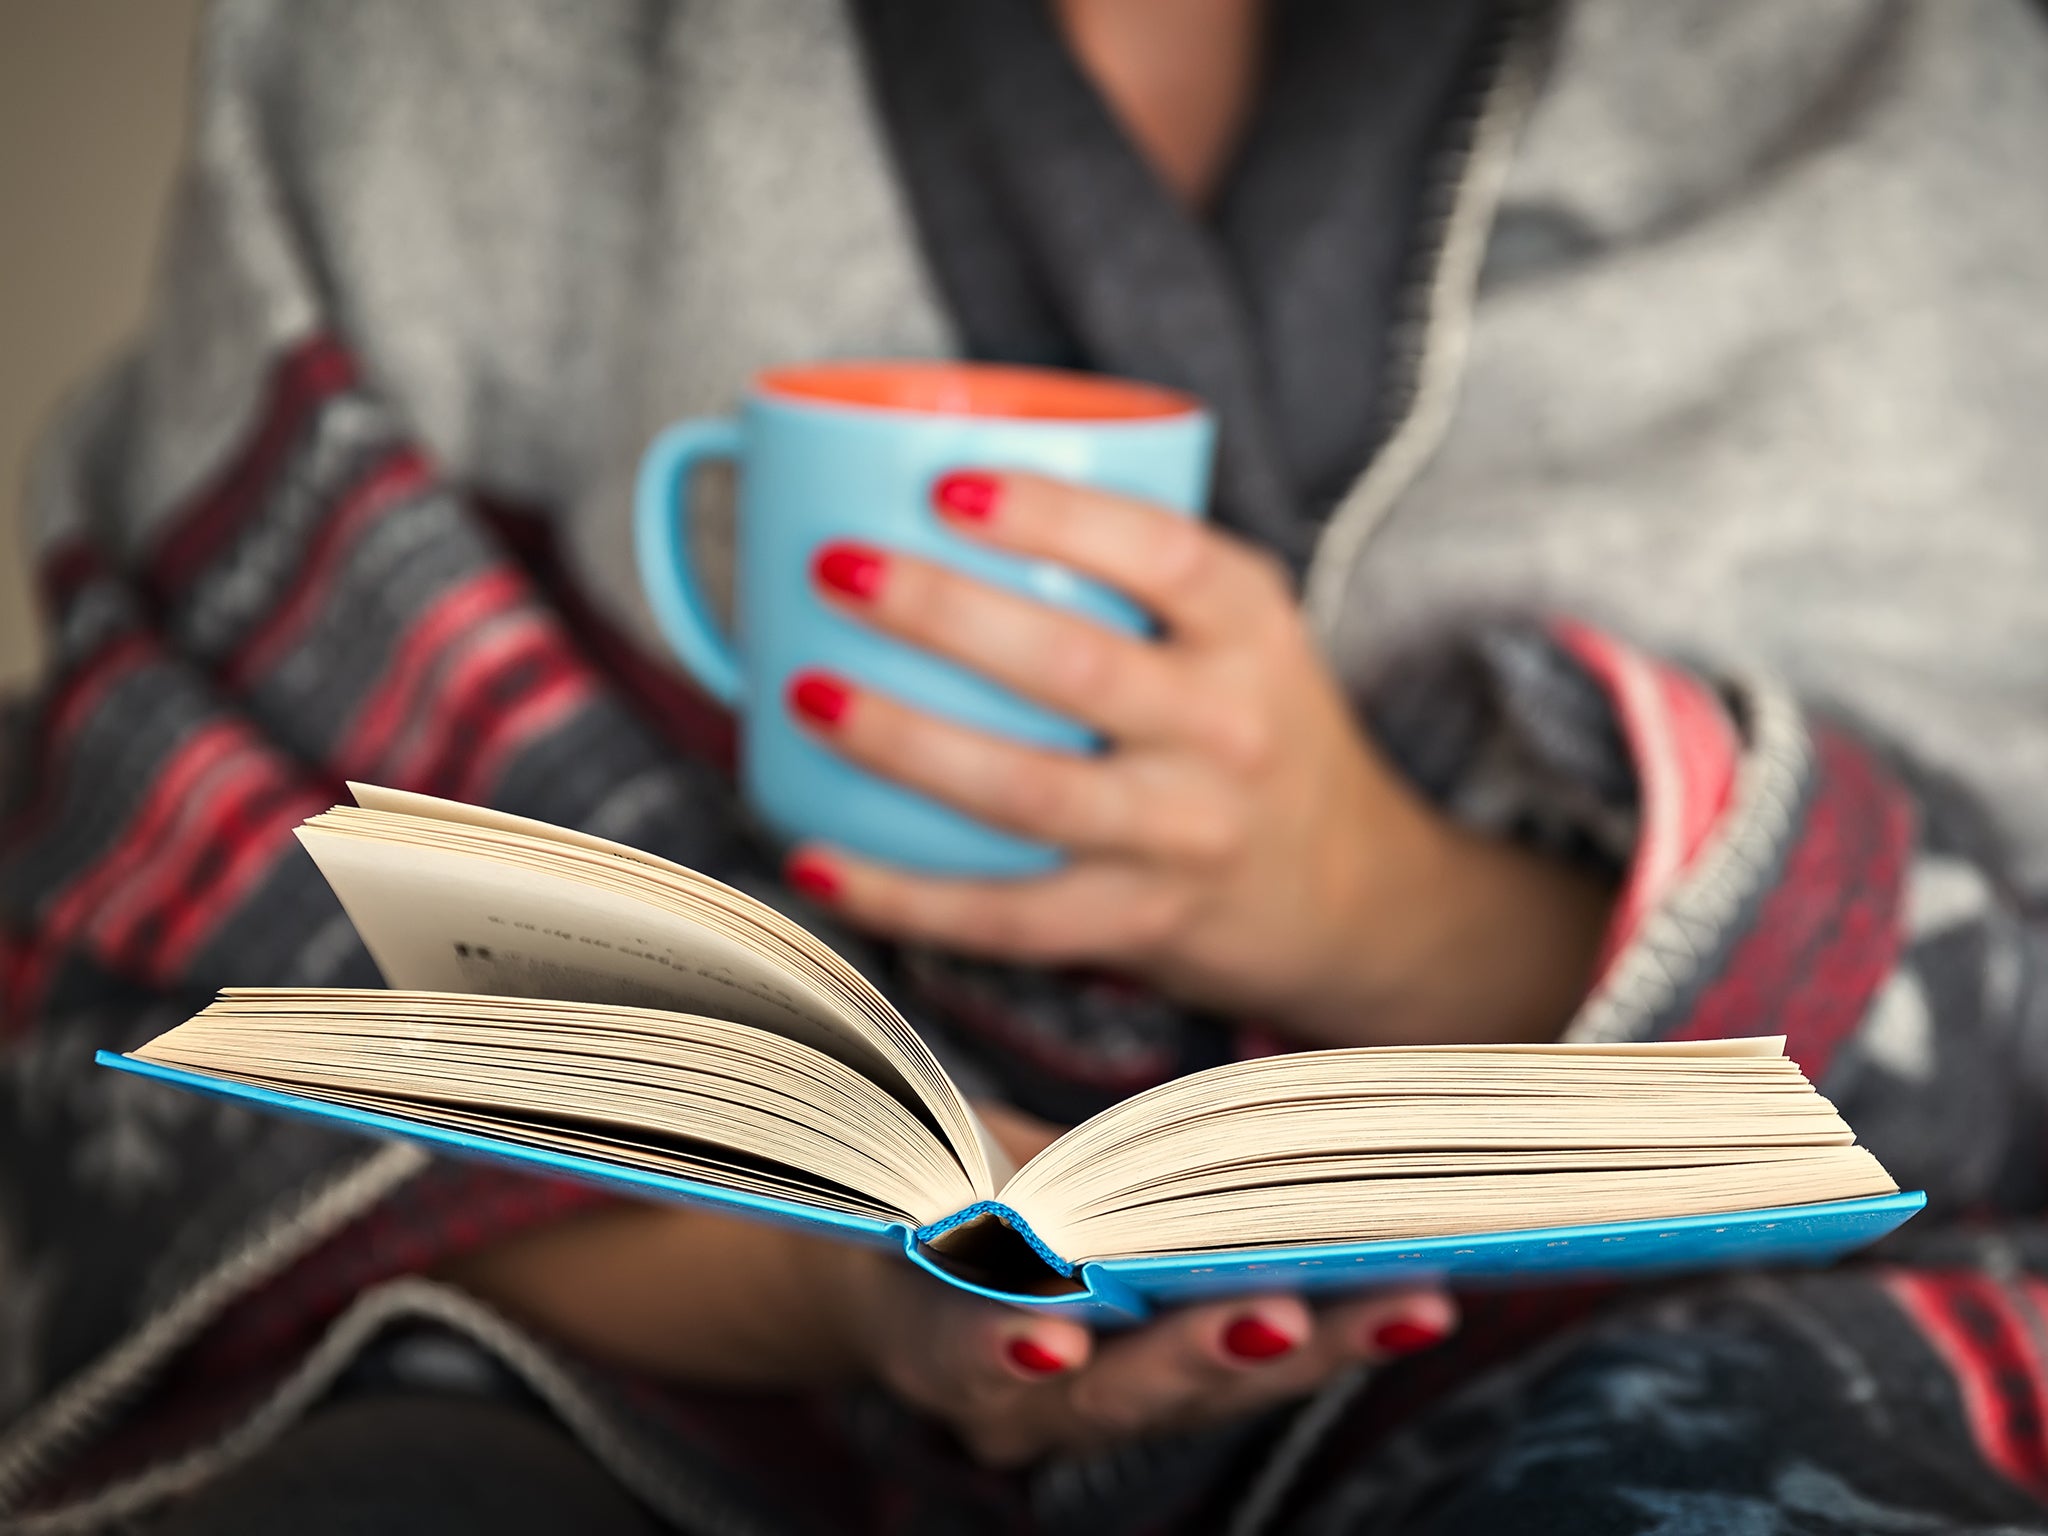 ‘Catching up on my reading left me much happier than the usual rush, rush routine around the city’ (iStock)